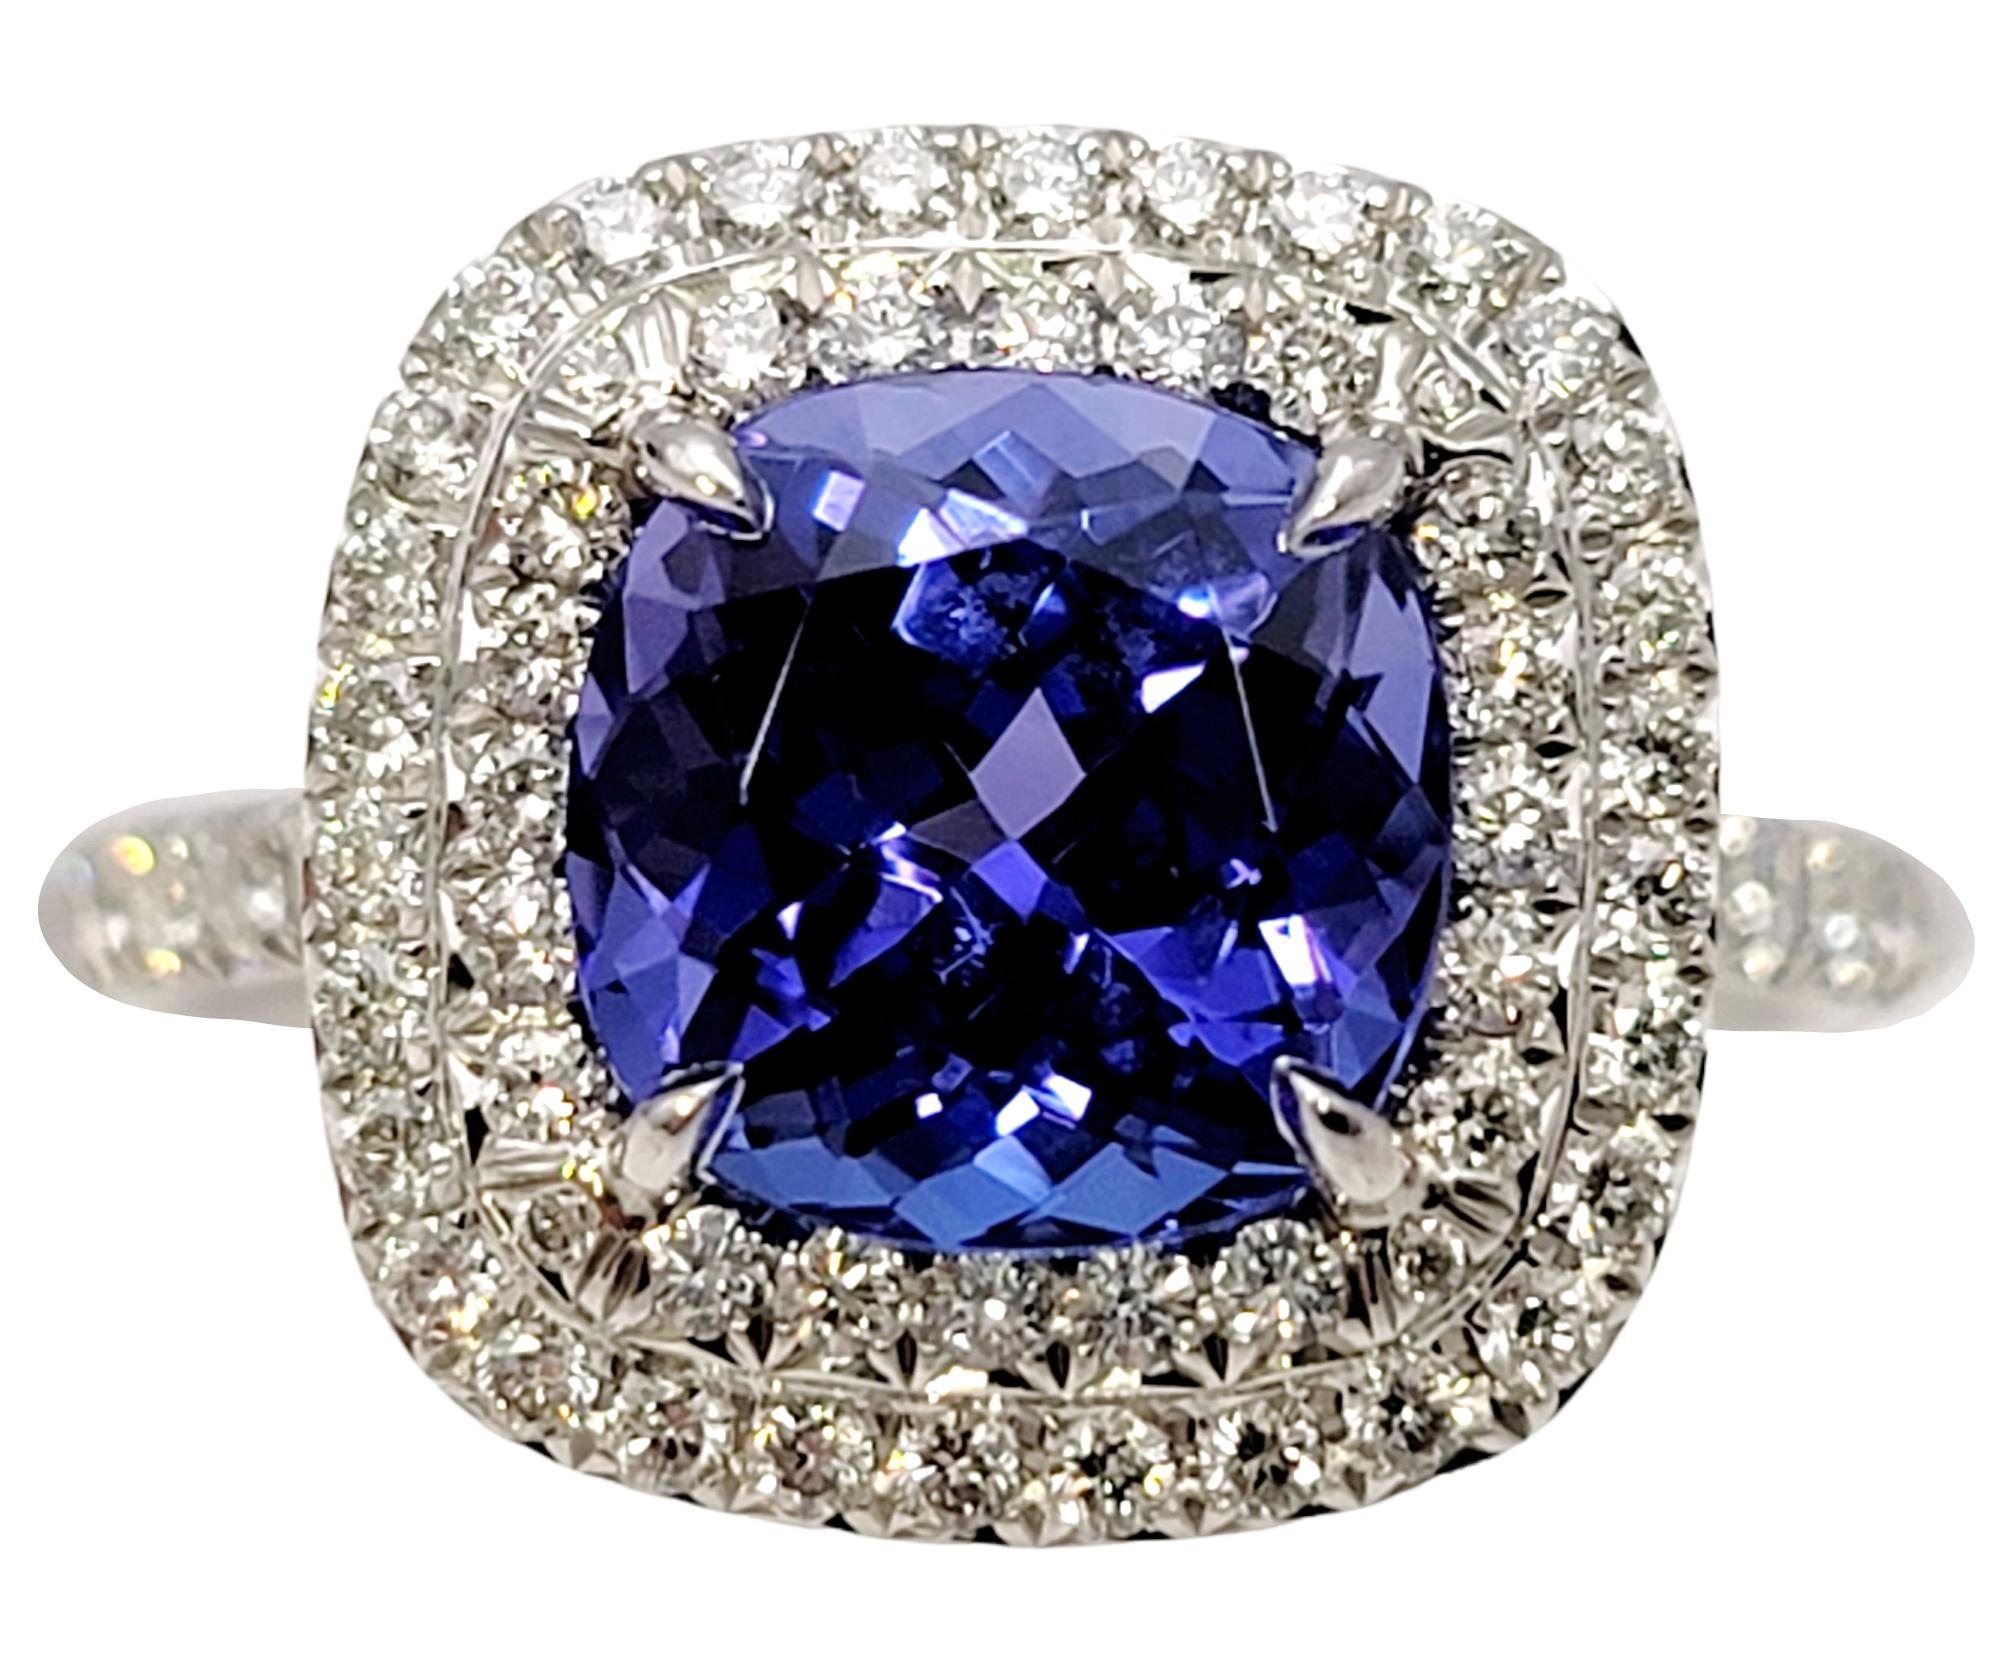 Ring size: 6.5

Breathtaking double halo tanzanite and diamond band ring from renowned jeweler, Tiffany & Co.. The scintillating Soleste ring will absolutely radiate on her finger. The striking bluish-violet cushion cut center stone is paired with a